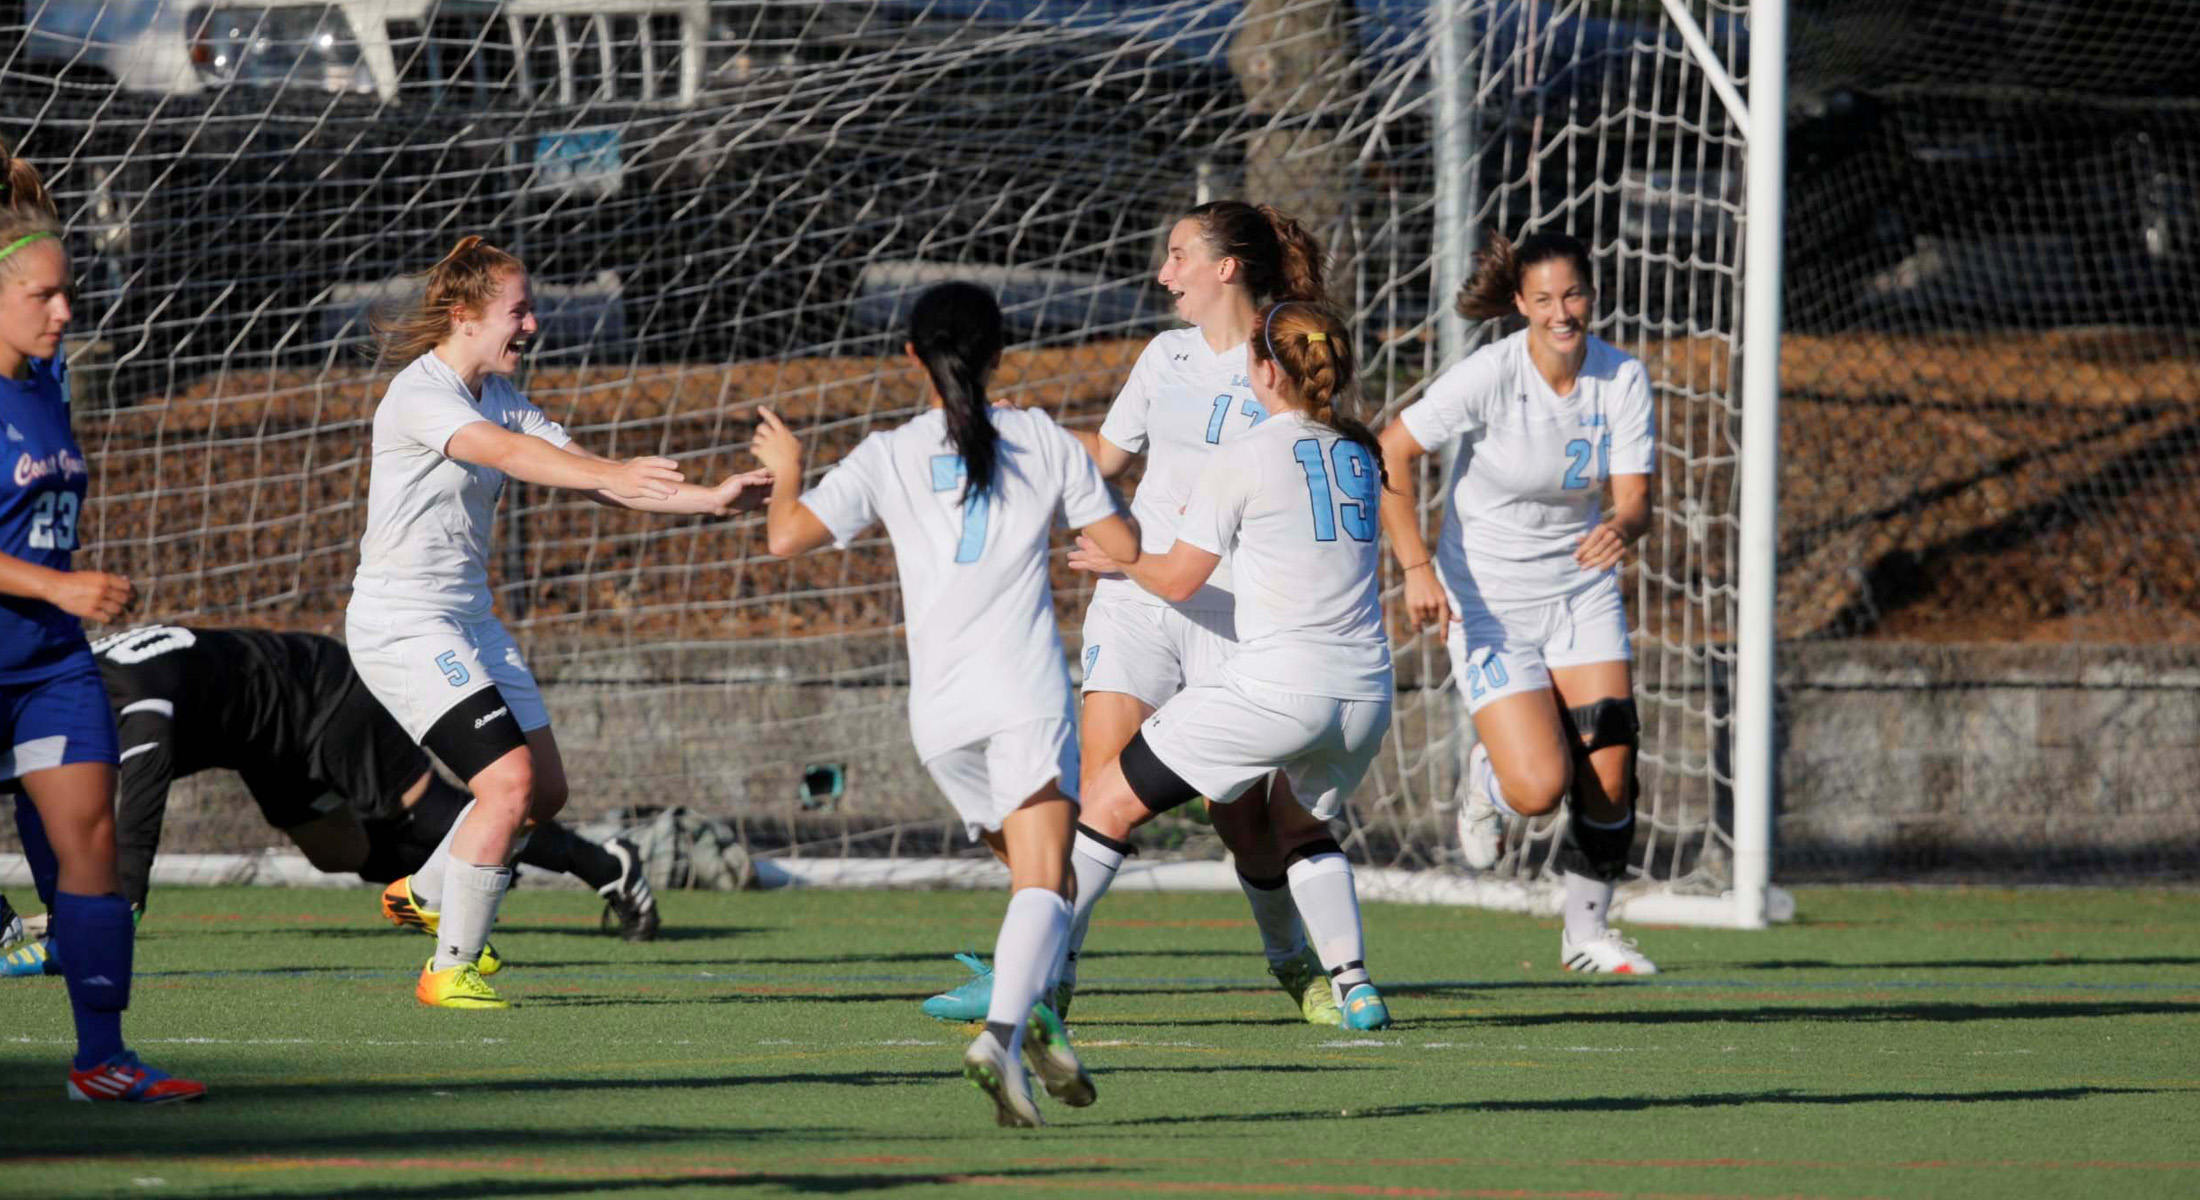 Bridget Lynch's Record Setting Day Propels Women's Soccer to 8-0 Win over Norwich